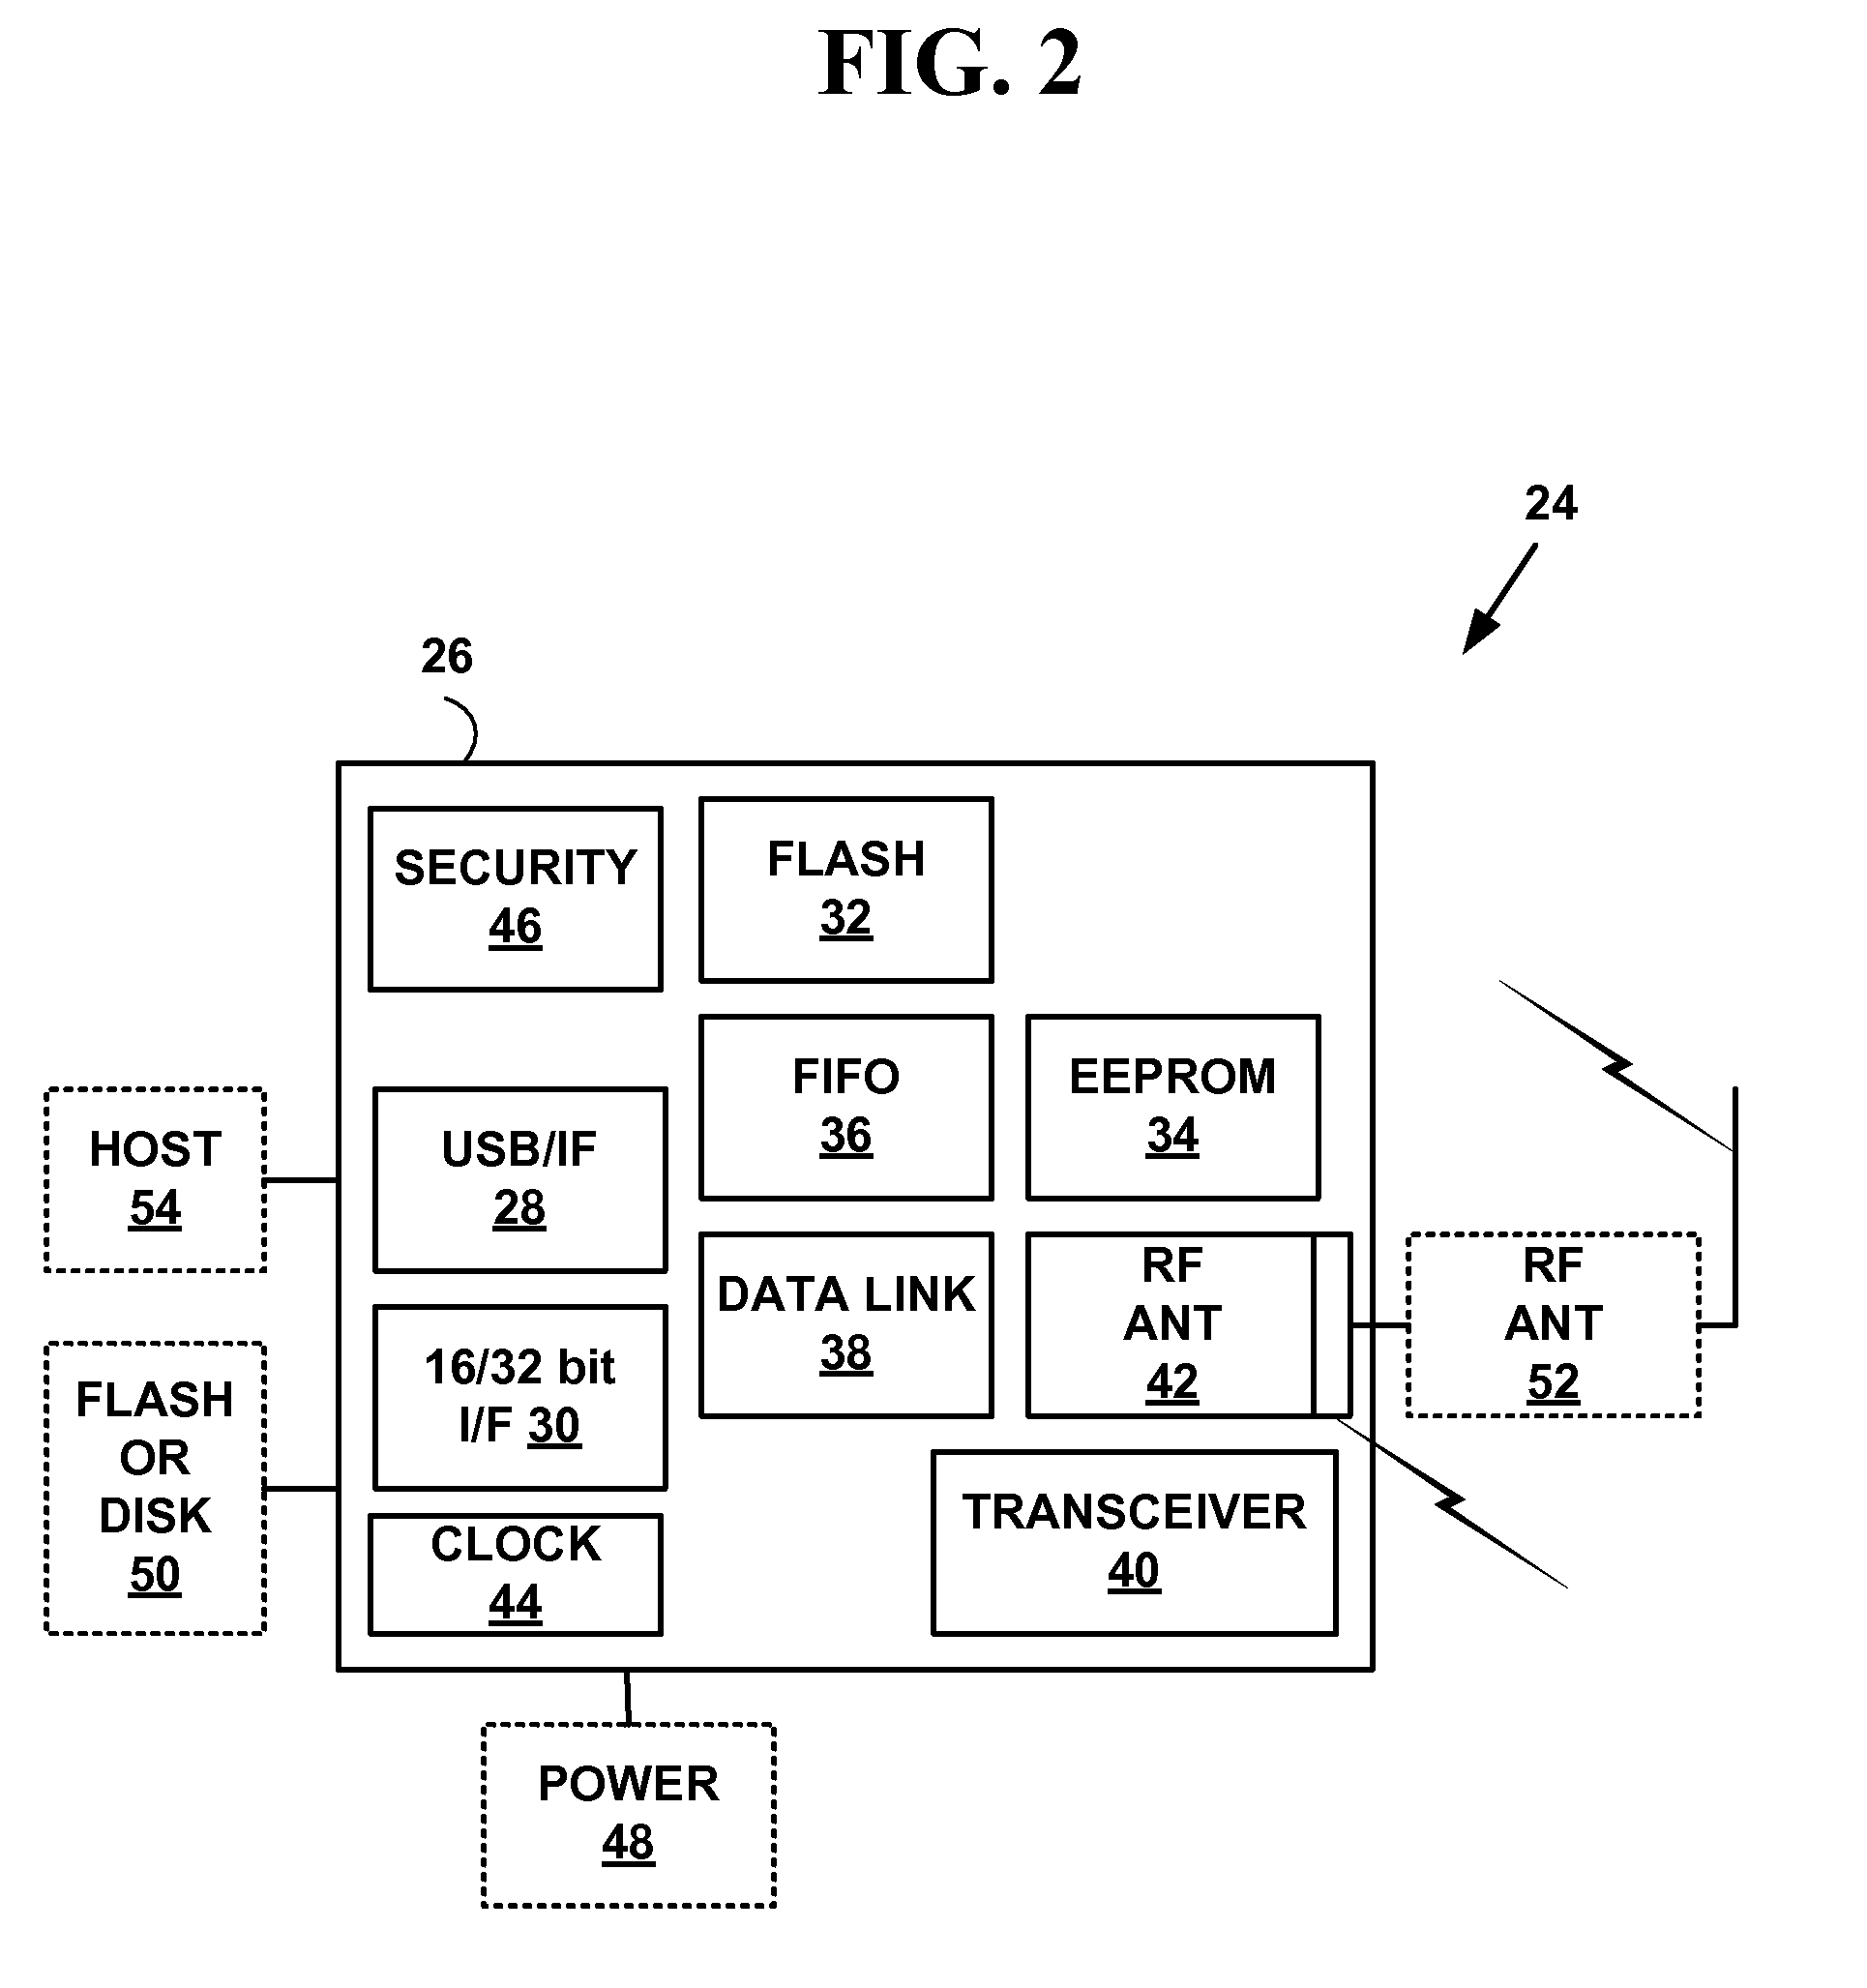 Method and system for dynamic information exchange on location aware mesh network devices